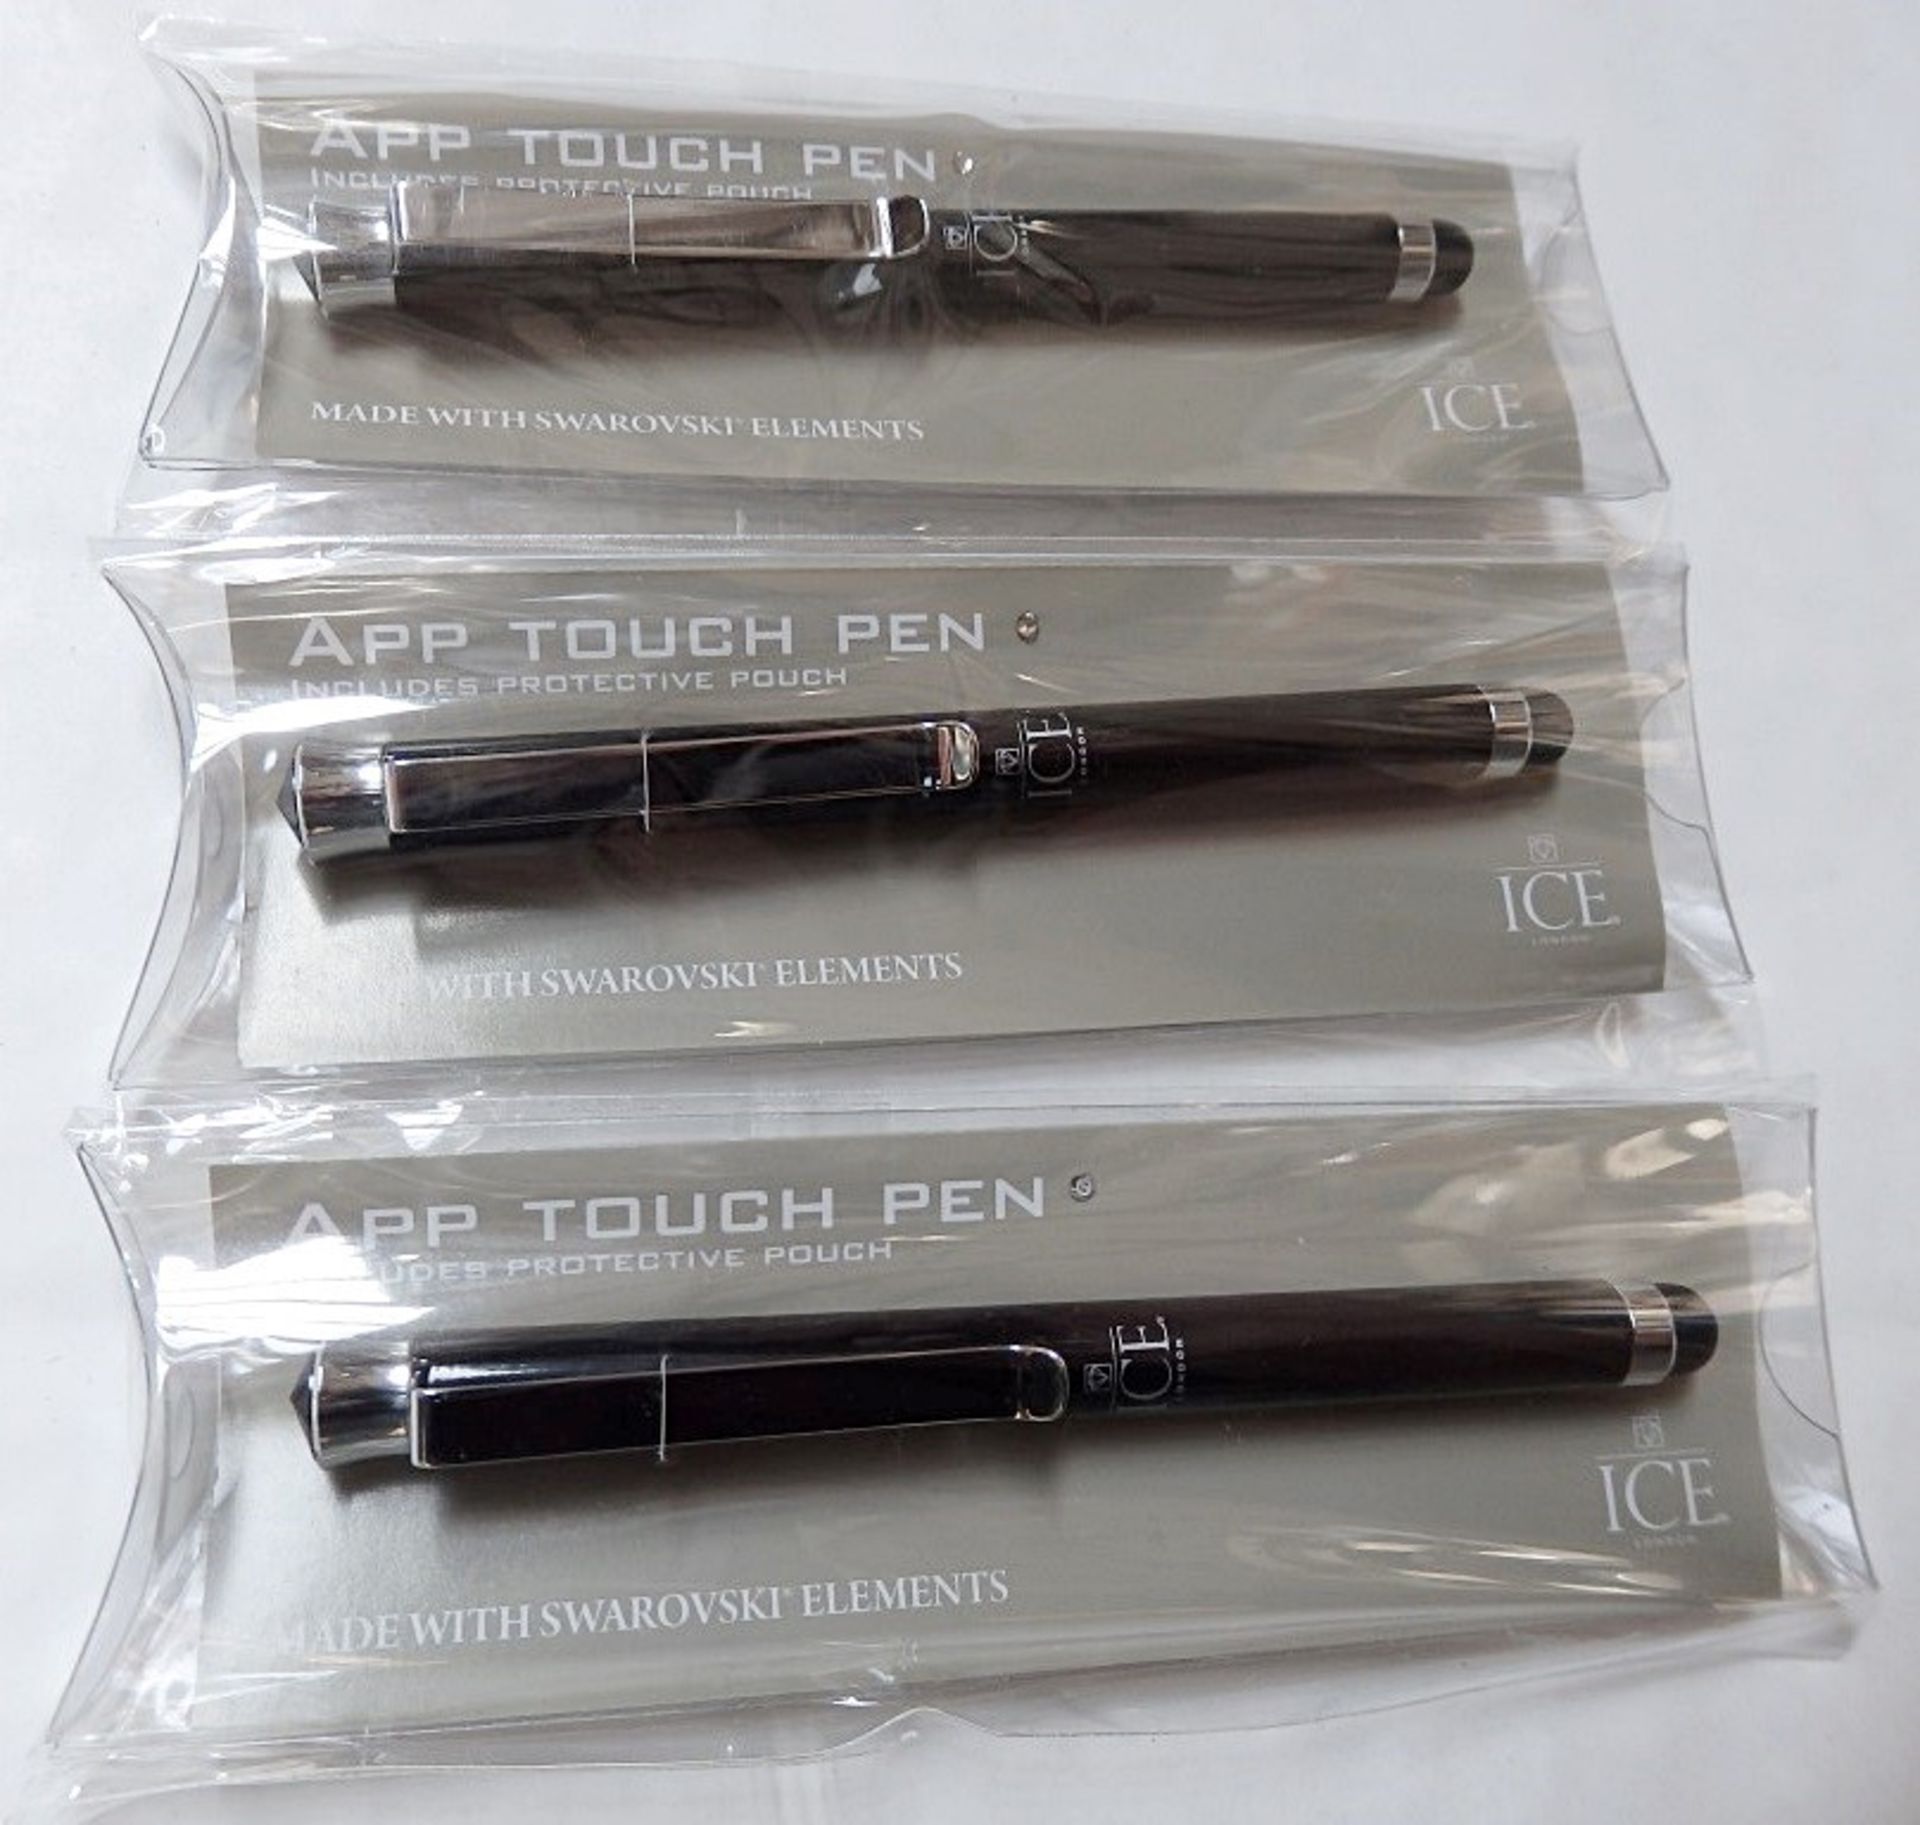 40 x ICE LONDON App Touch Stylus - MADE WITH SWAROVSKI ELEMENTS - Ideal For Touch Screen Phones & - Image 3 of 3